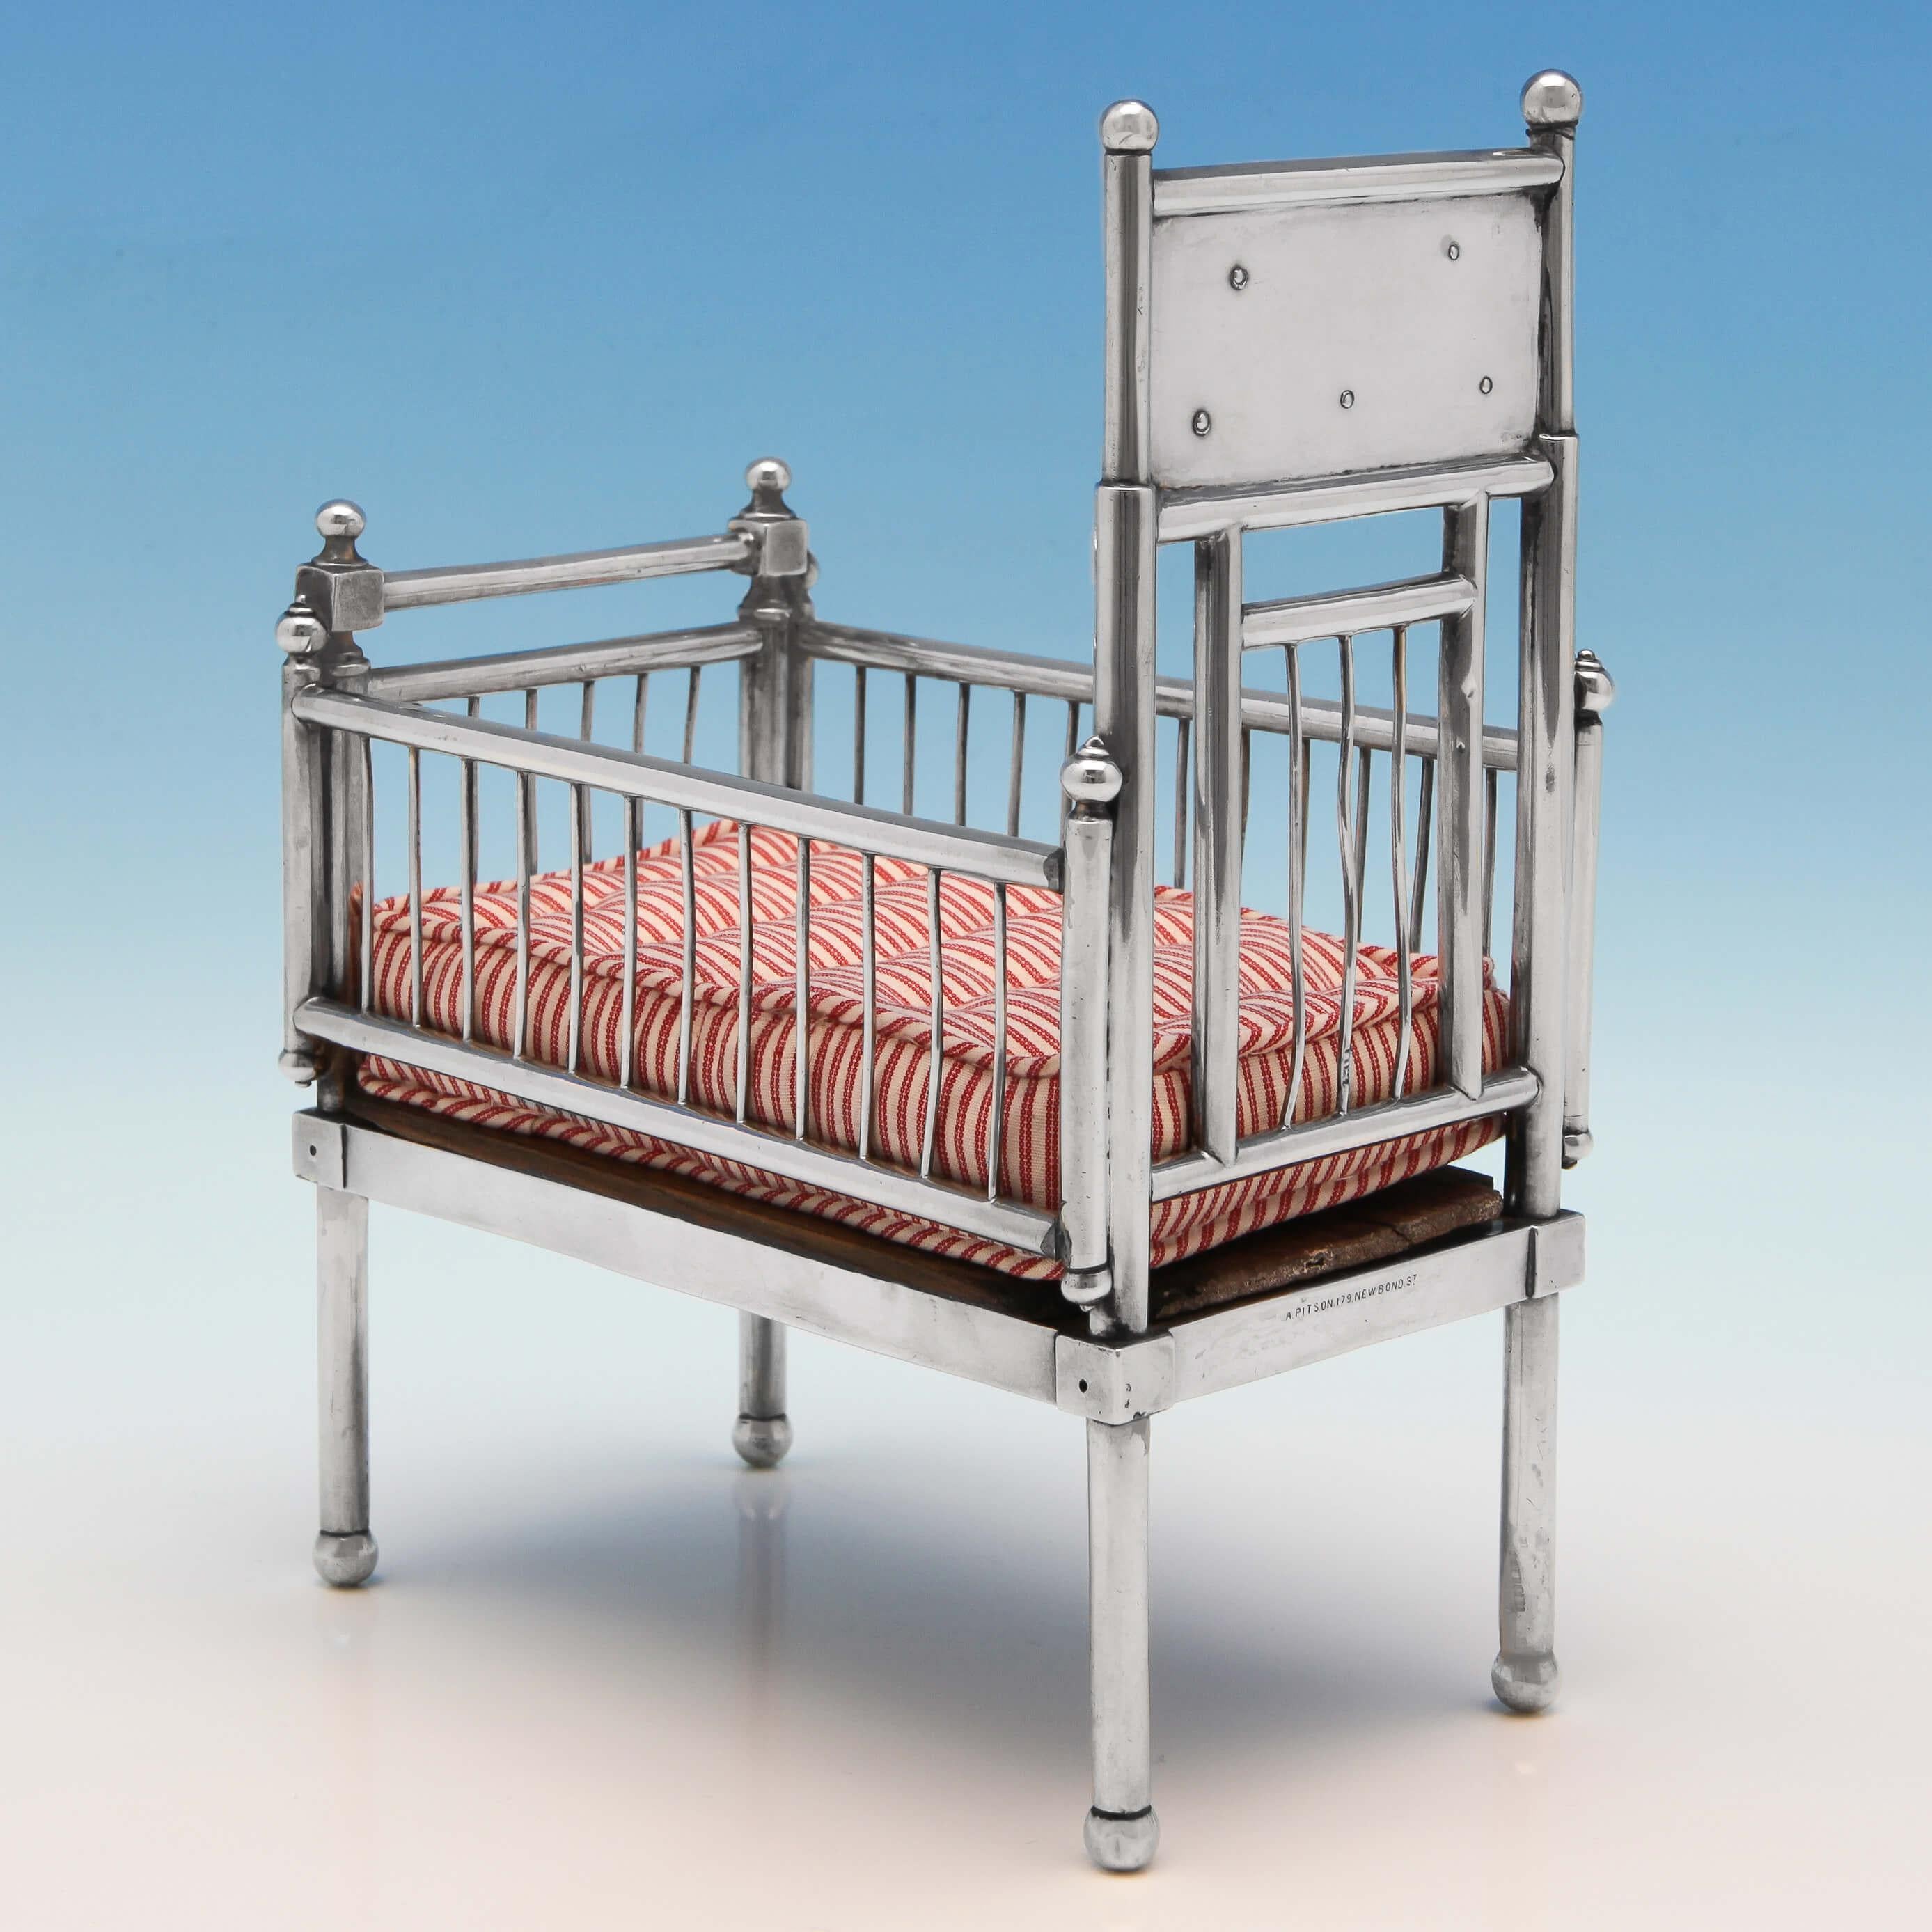 Hallmarked in London in 1902 by William Comyns, this fabulous Edwardian Antique, Sterling Silver Doll's House Cot is very realistic and is presented with a handmade mattress. The headboard bears the words 